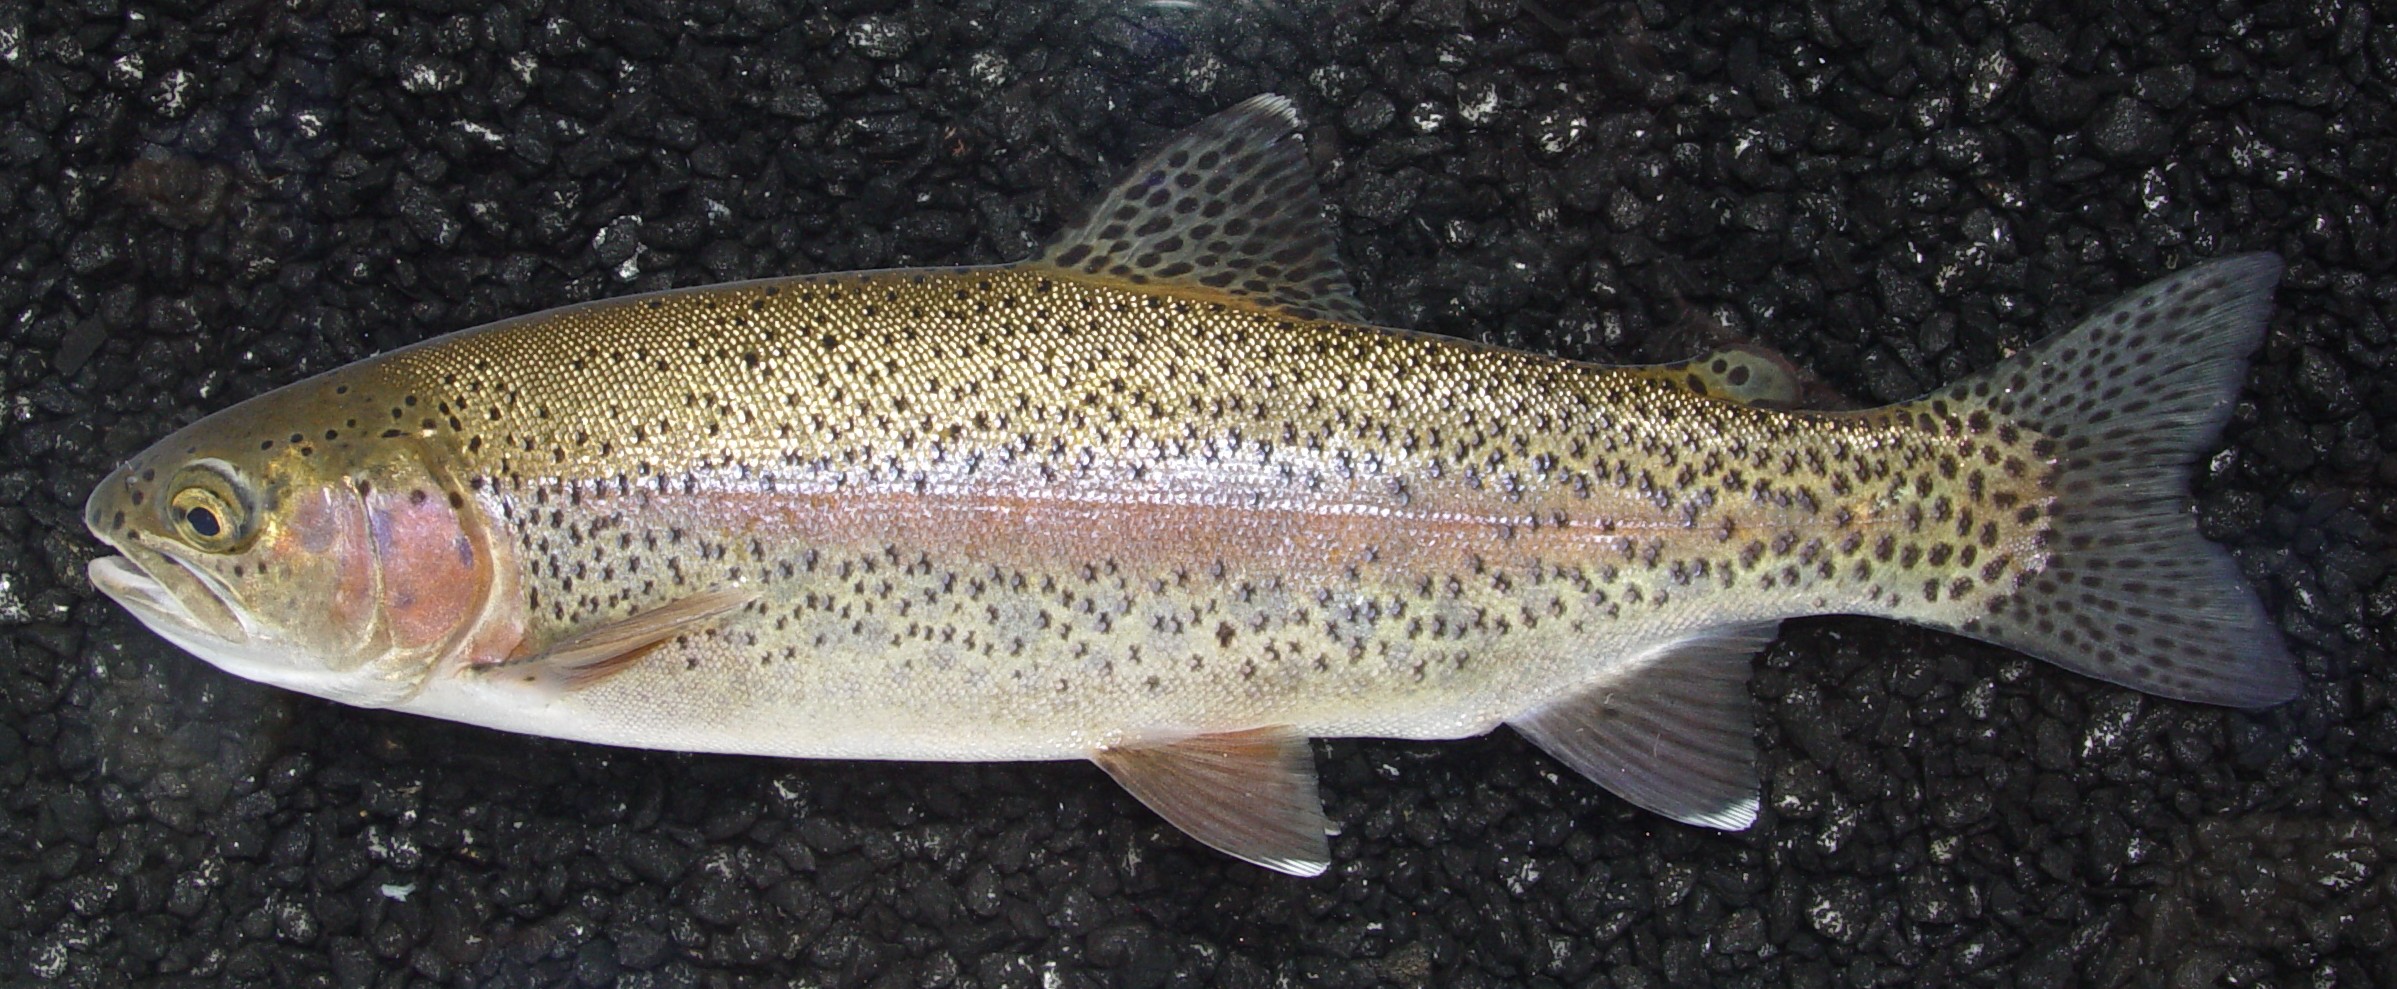 Images of Trout | 2397x989